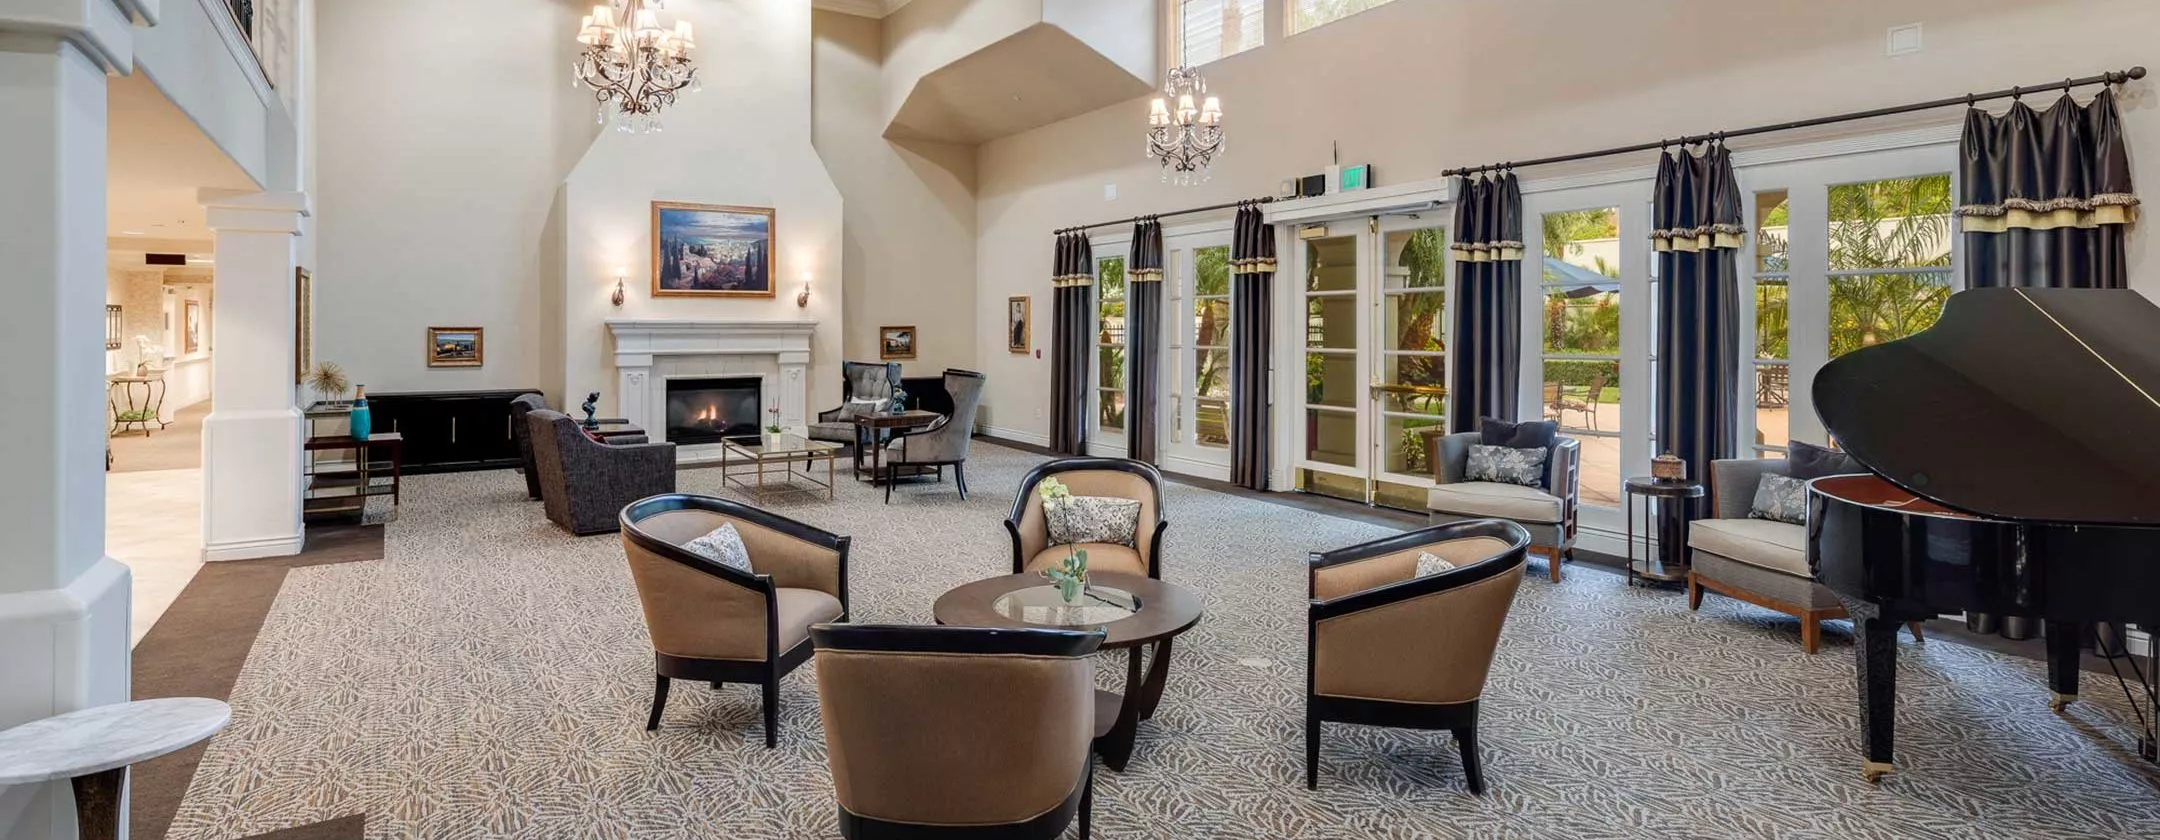 Chino Hills lounge area with piano and fire place